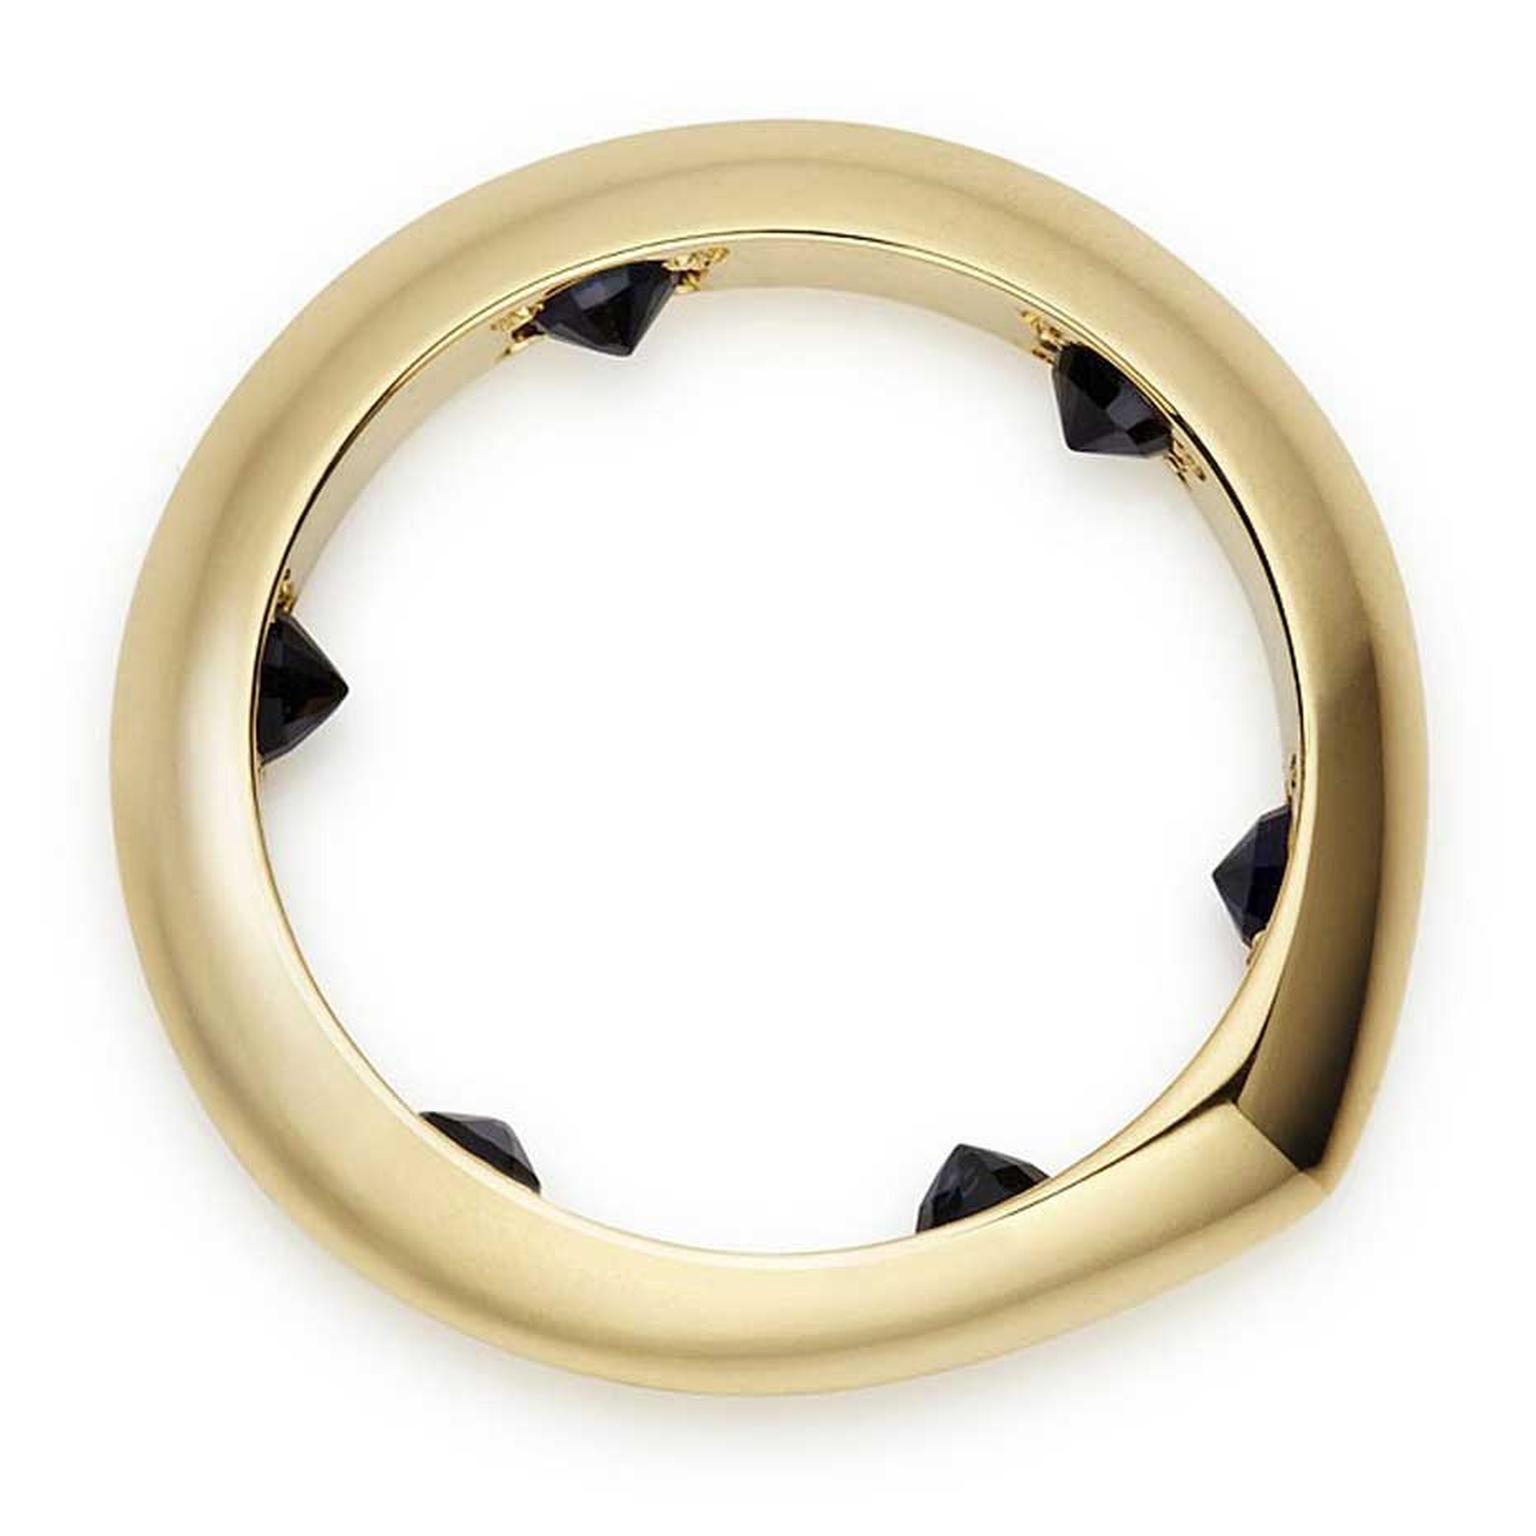 Hannah Martin's Secret Stud ring in 18ct yellow gold with rubies, finished with black rhodium.